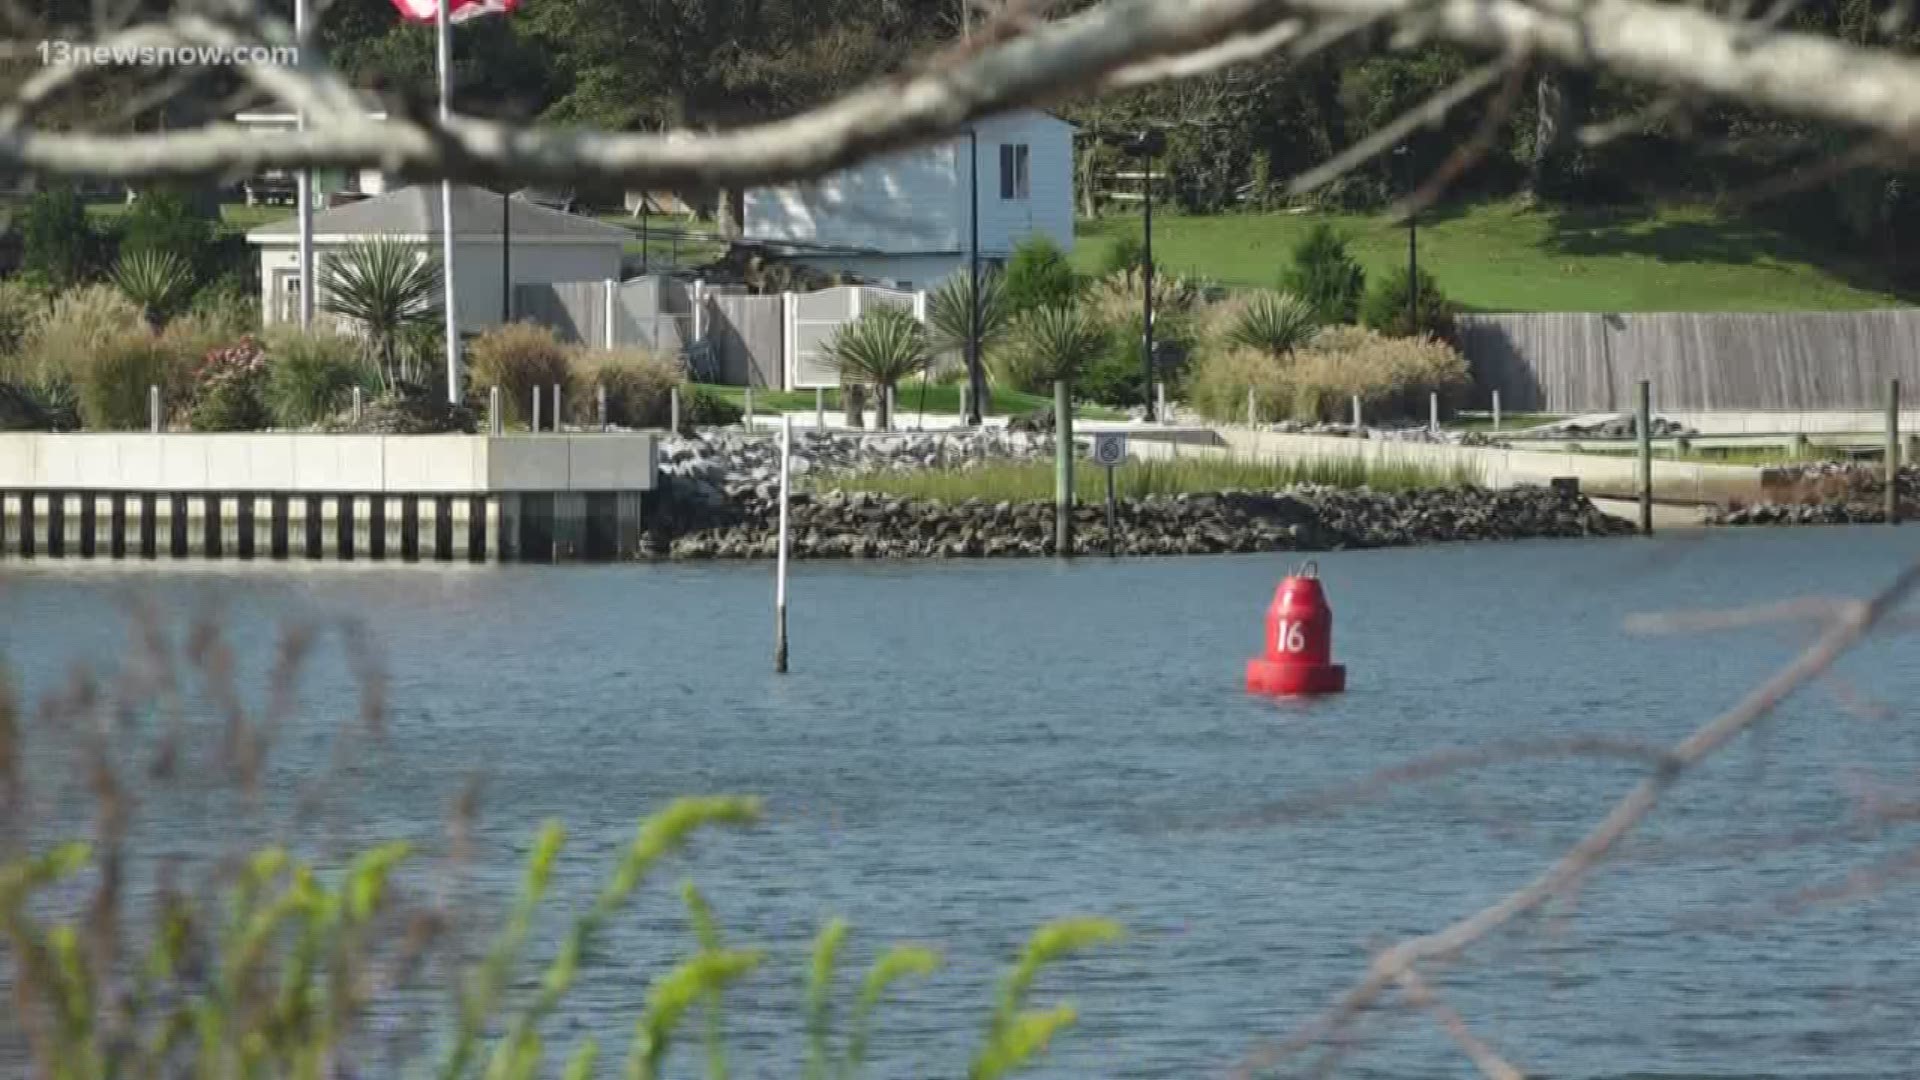 They're placing new buoys in Broad Bay, Linkhorn Bay, and the Lynnhaven Inlet. This is a popular spot for boaters - but the waters aren't always easy to navigate.